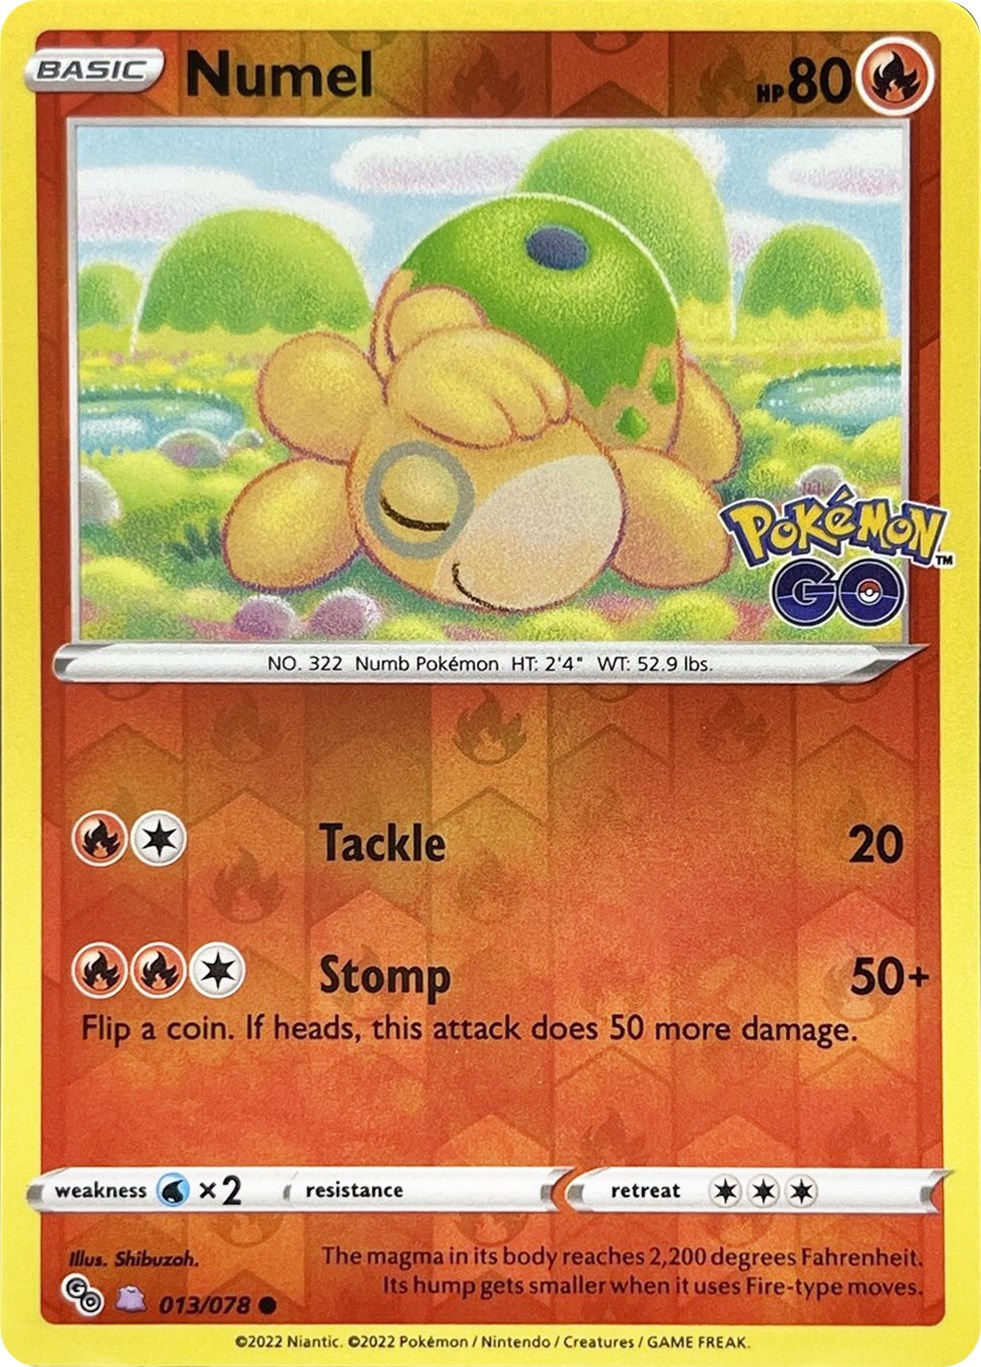 Numel (Peelable Ditto)